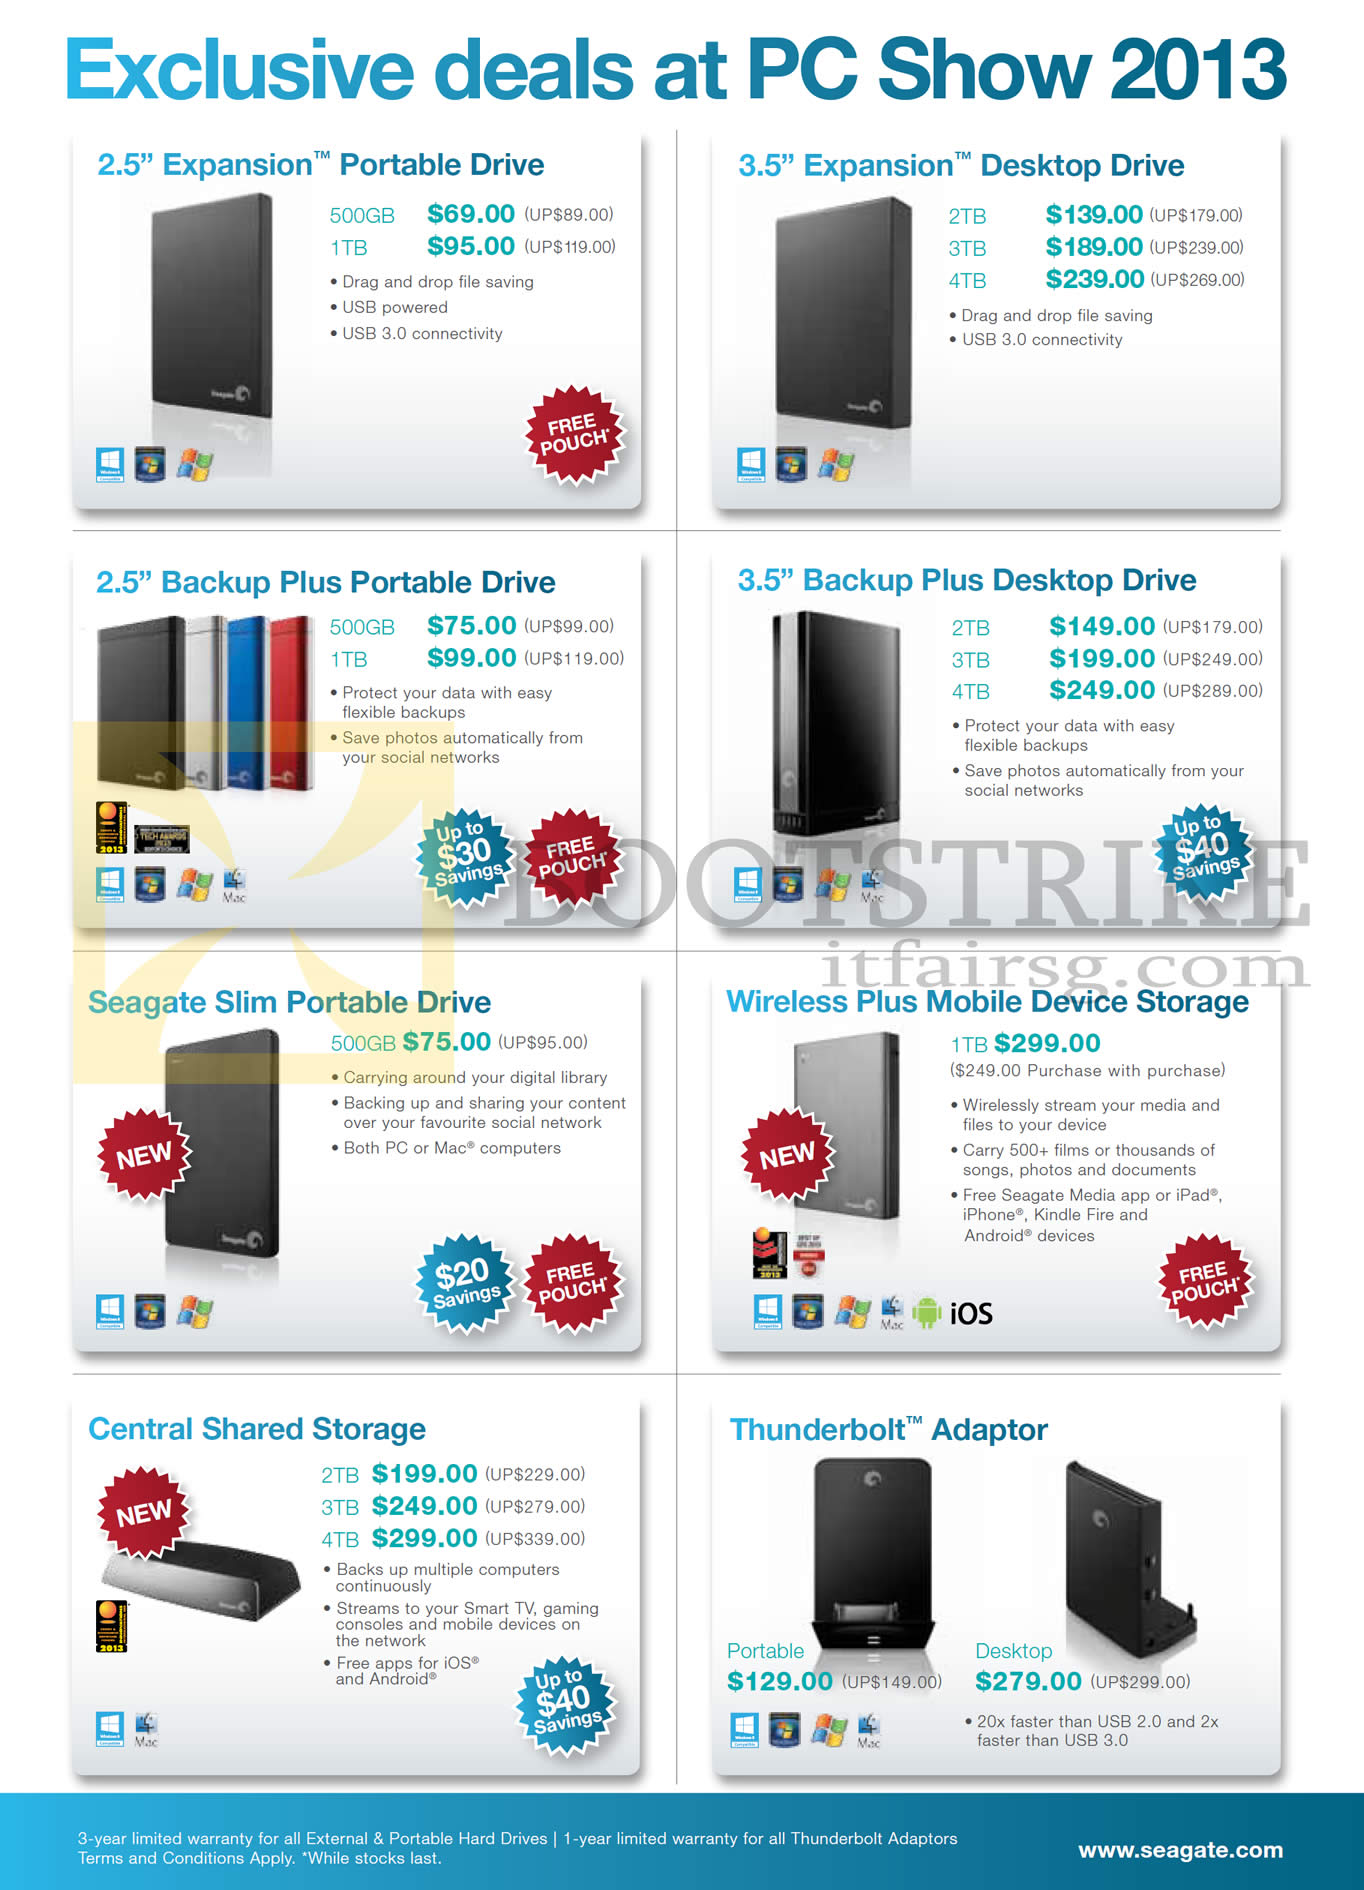 PC SHOW 2013 price list image brochure of Seagate Expansion Portable Drive, Desktop Drive, Backup Plus Desktop Drive, Portable Drive, Thunderbolt Adapter, Central Shared Storage